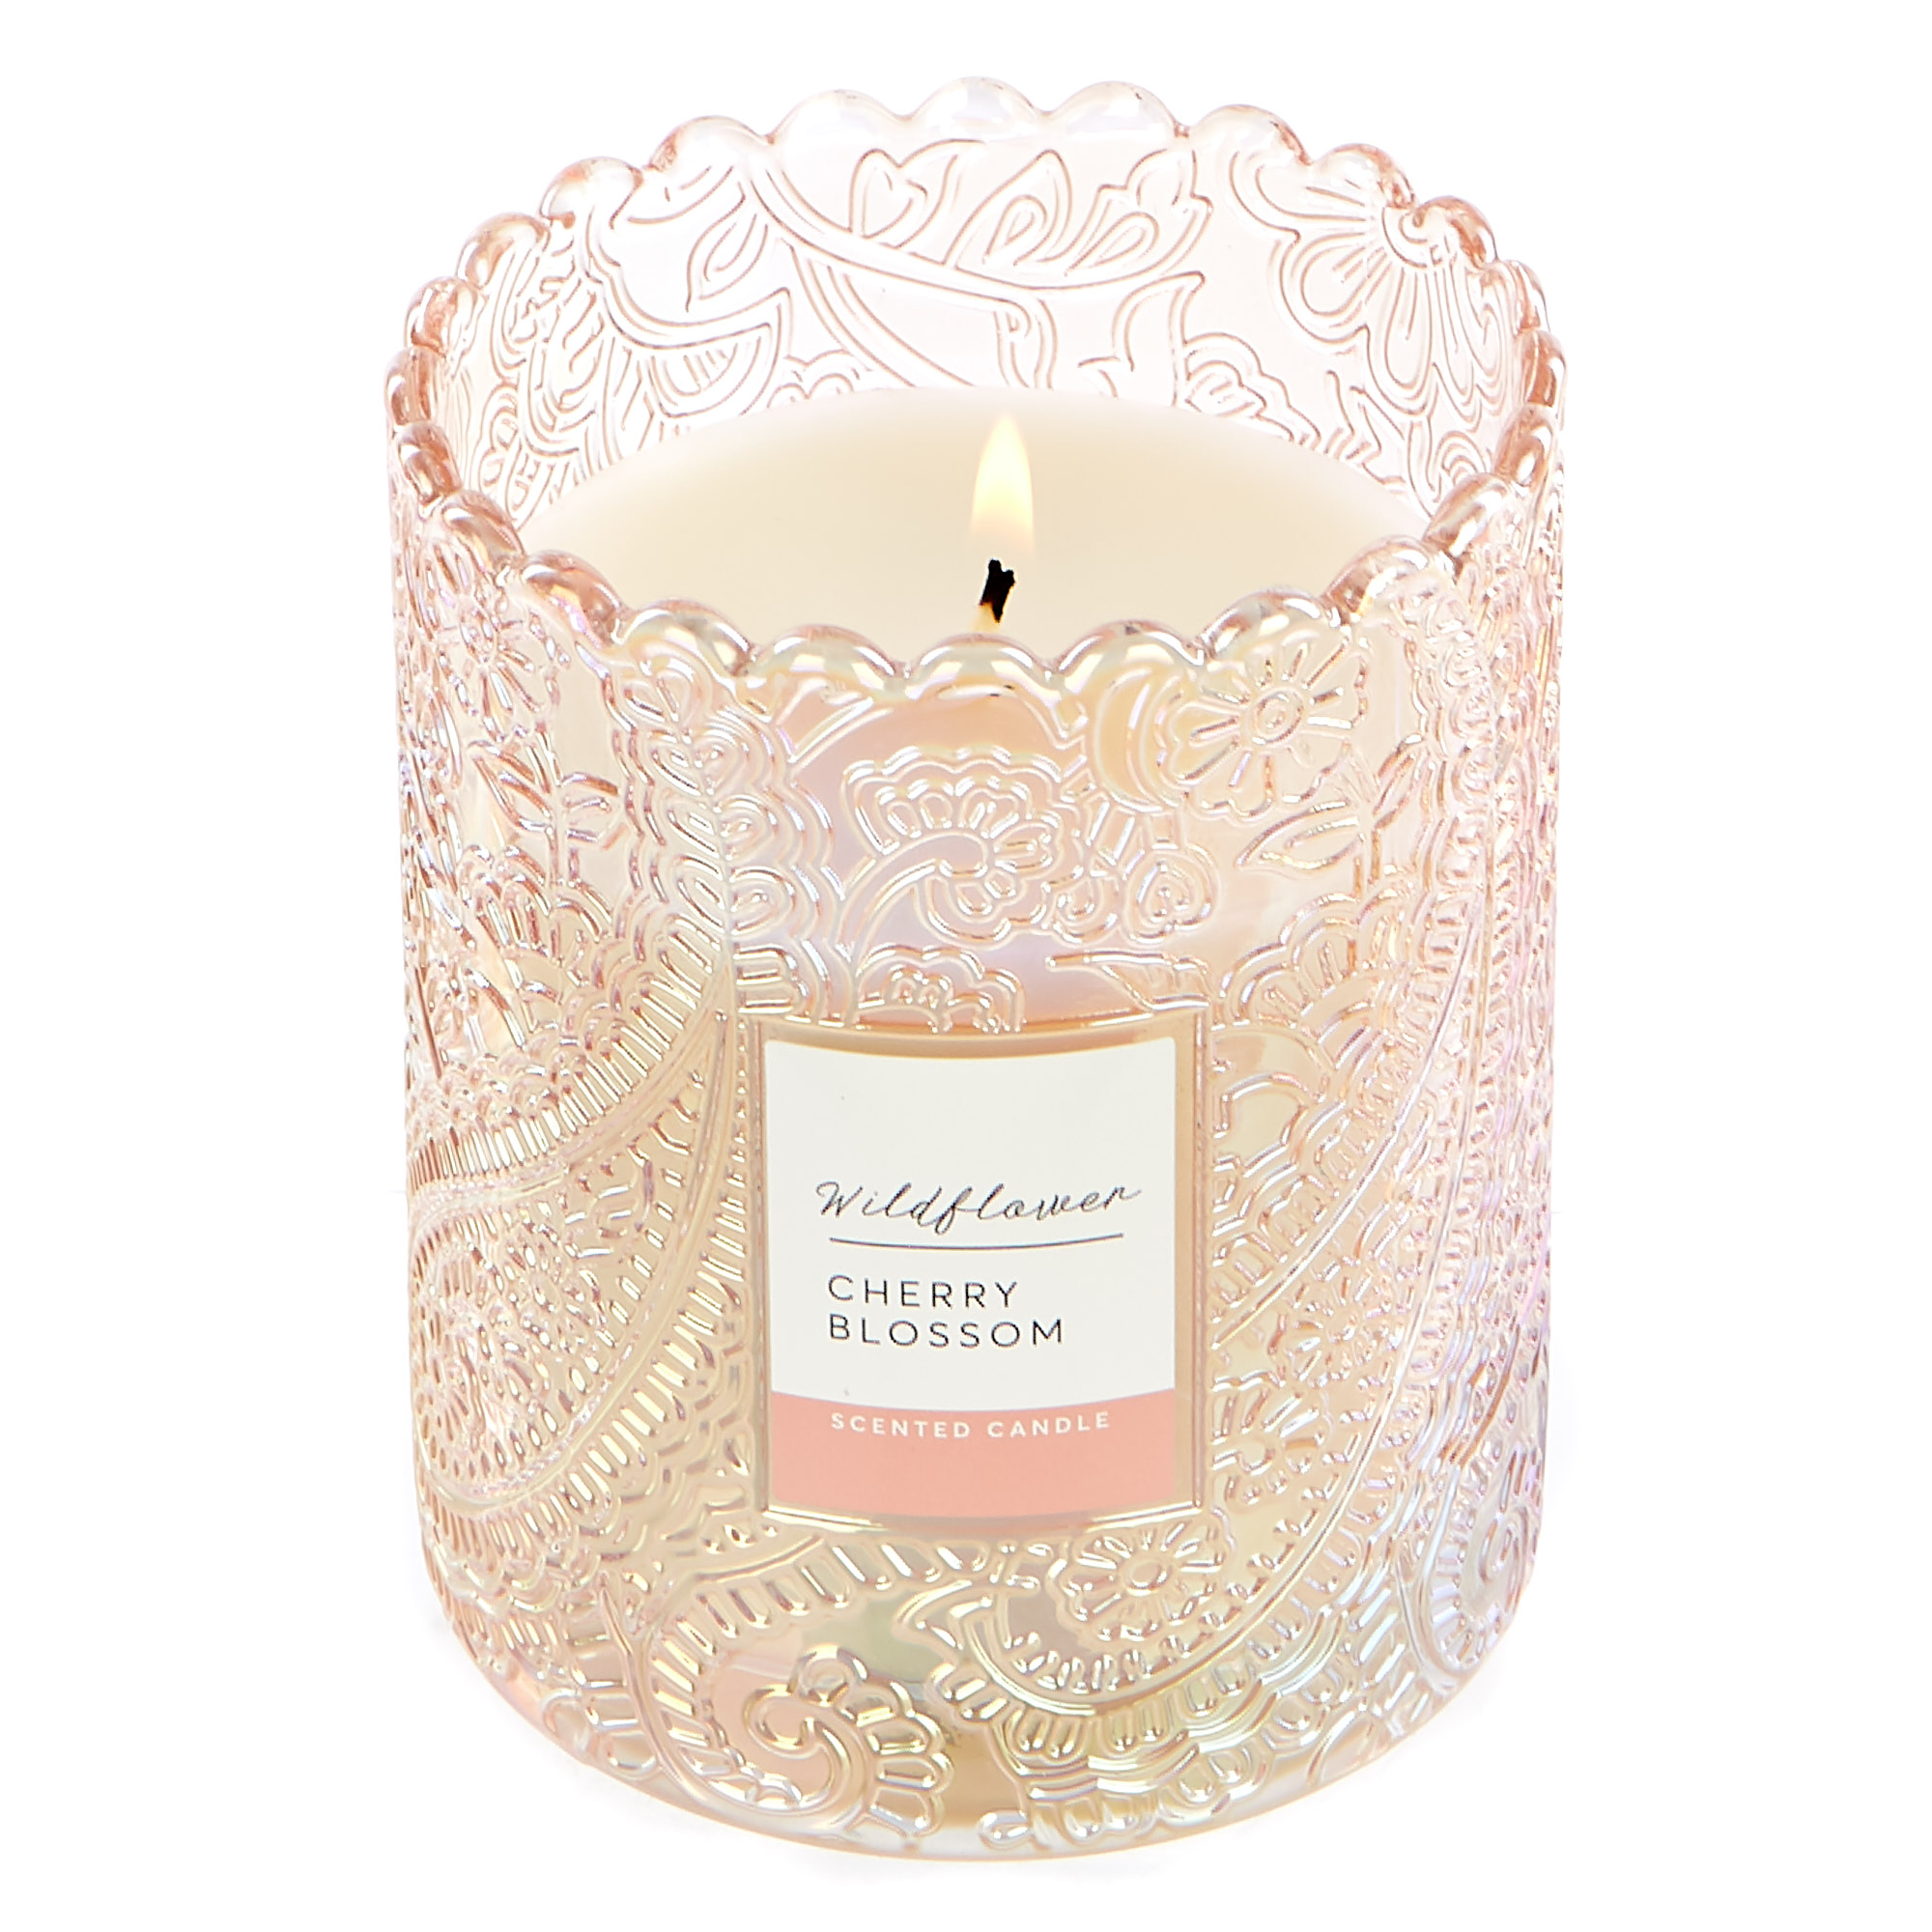 Wildflower Cherry Blossom Scented Candle